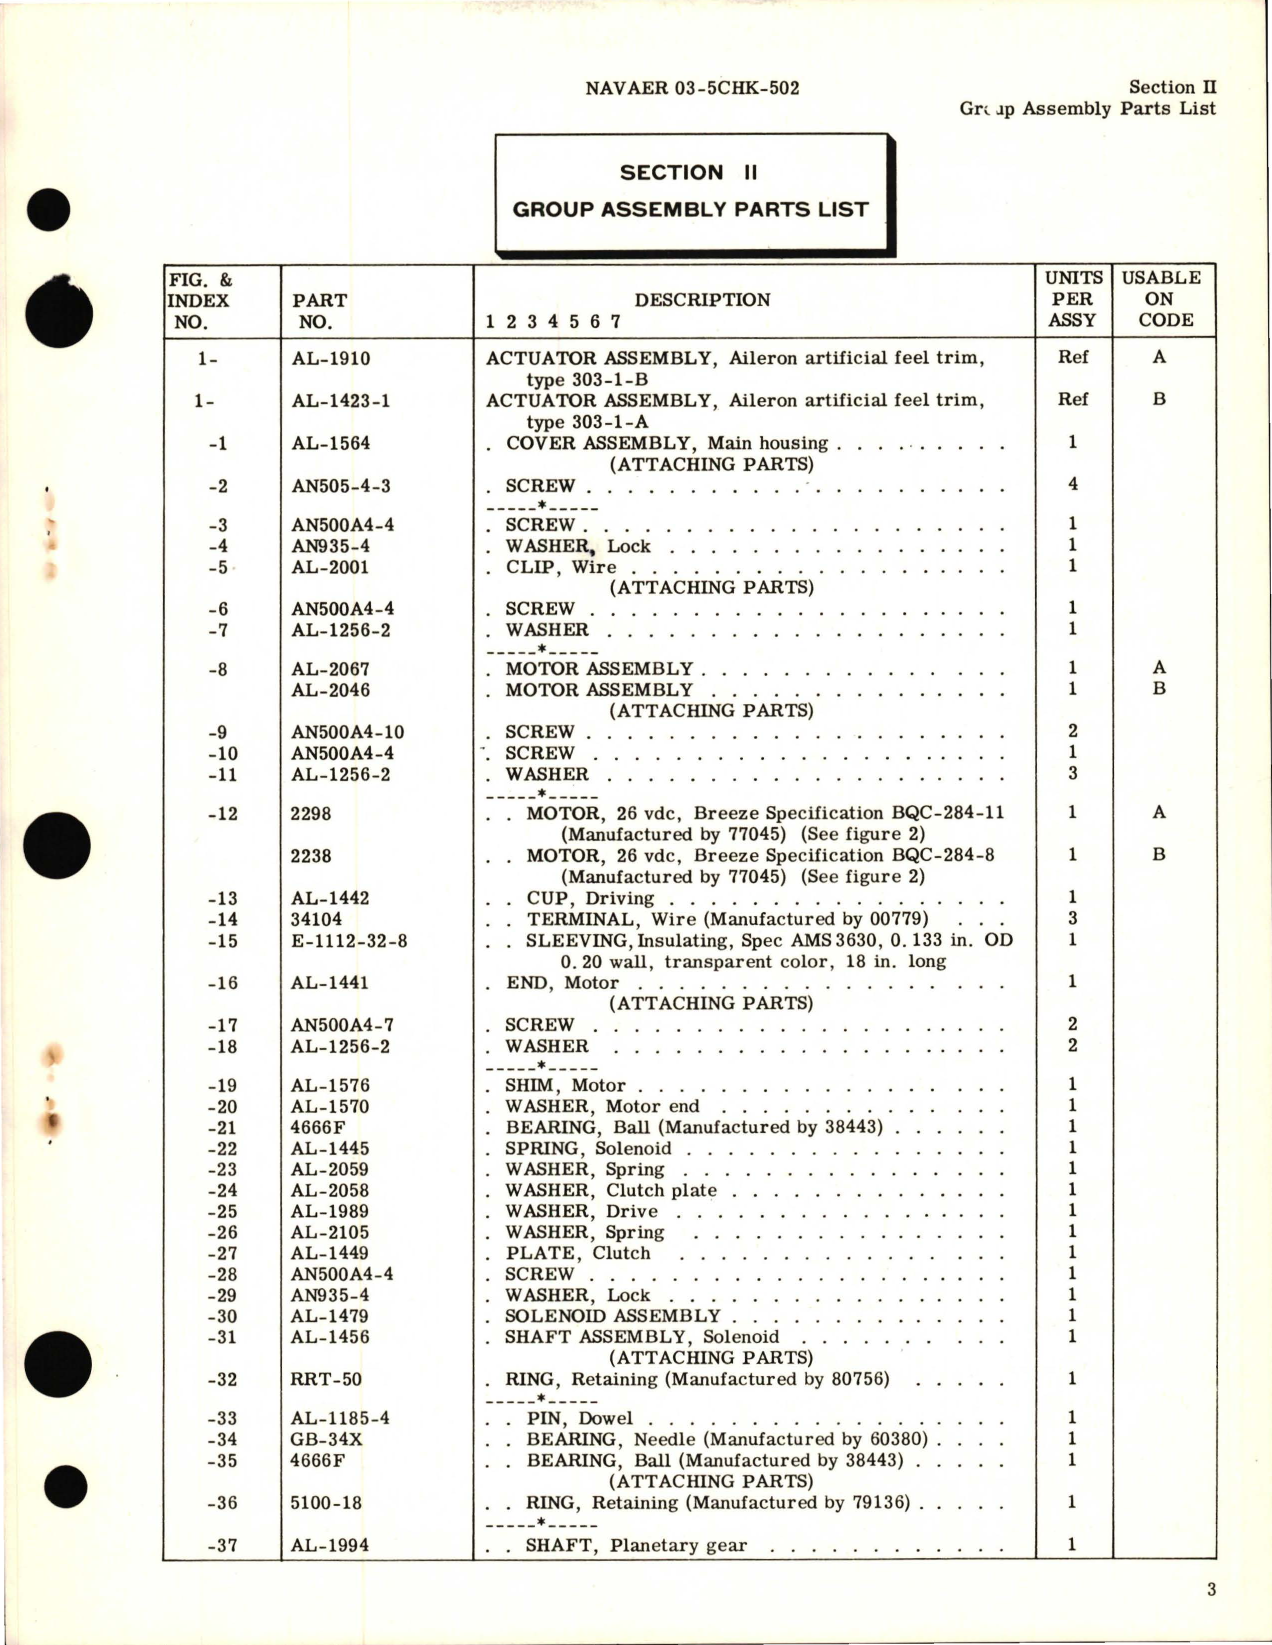 Sample page 5 from AirCorps Library document: Illustrated Parts Breakdown for Actuator Assembly, Aileron Artificial Feel Trim Part Numbers AL-1910 and AL-1423-1